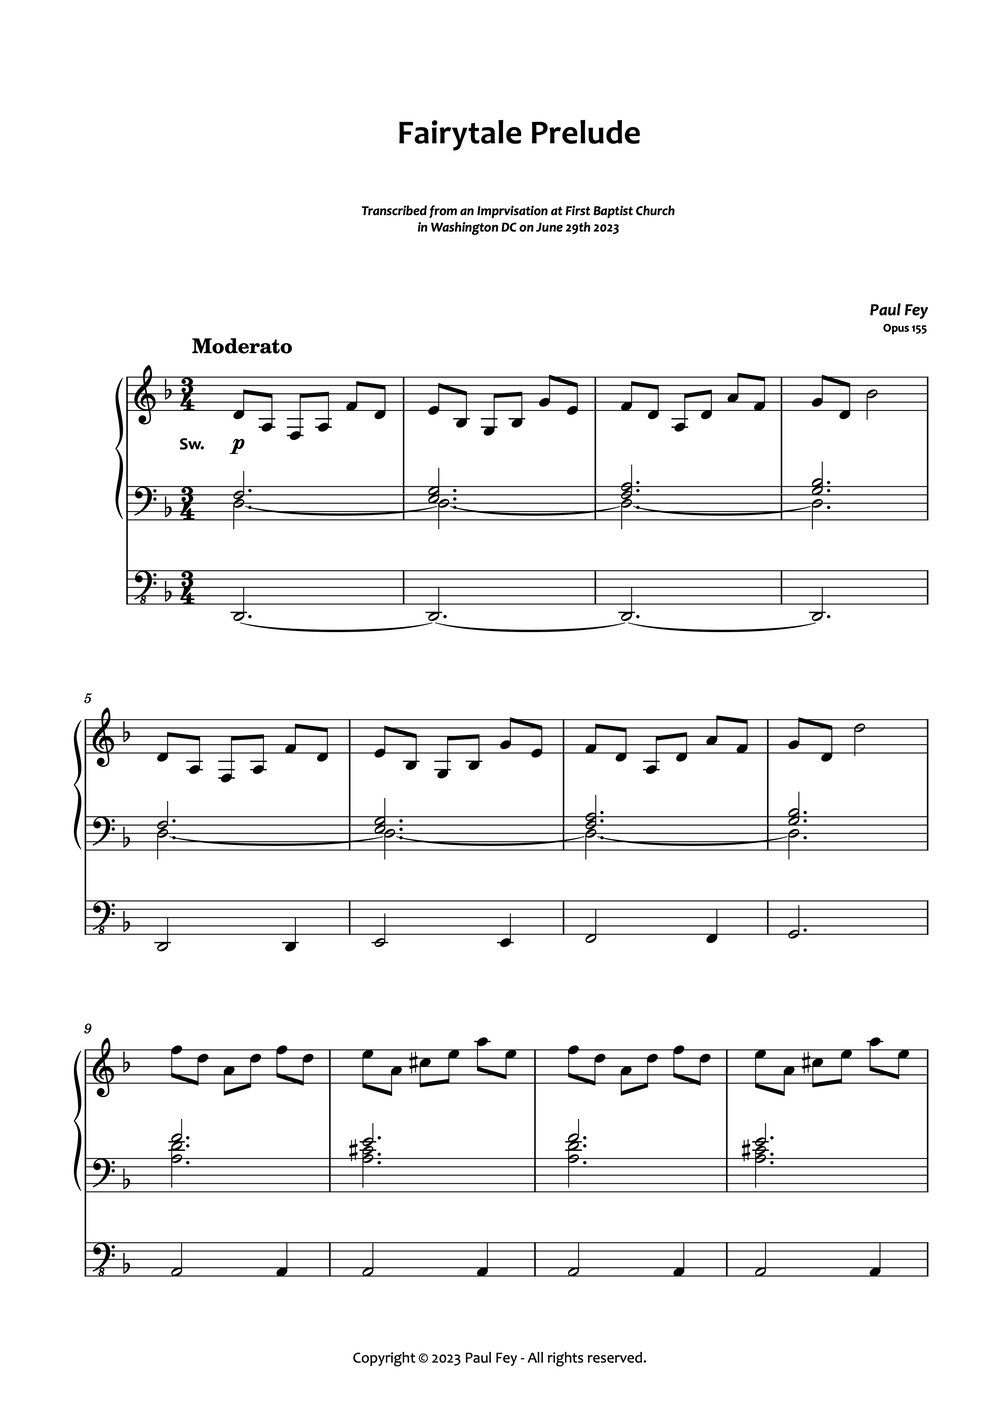 Fairytale Prelude transcribed from an improvisation at first Baptist church in Washington's DC on June 29th 2023 Organ Sheet Music by Paul Fey Organist.